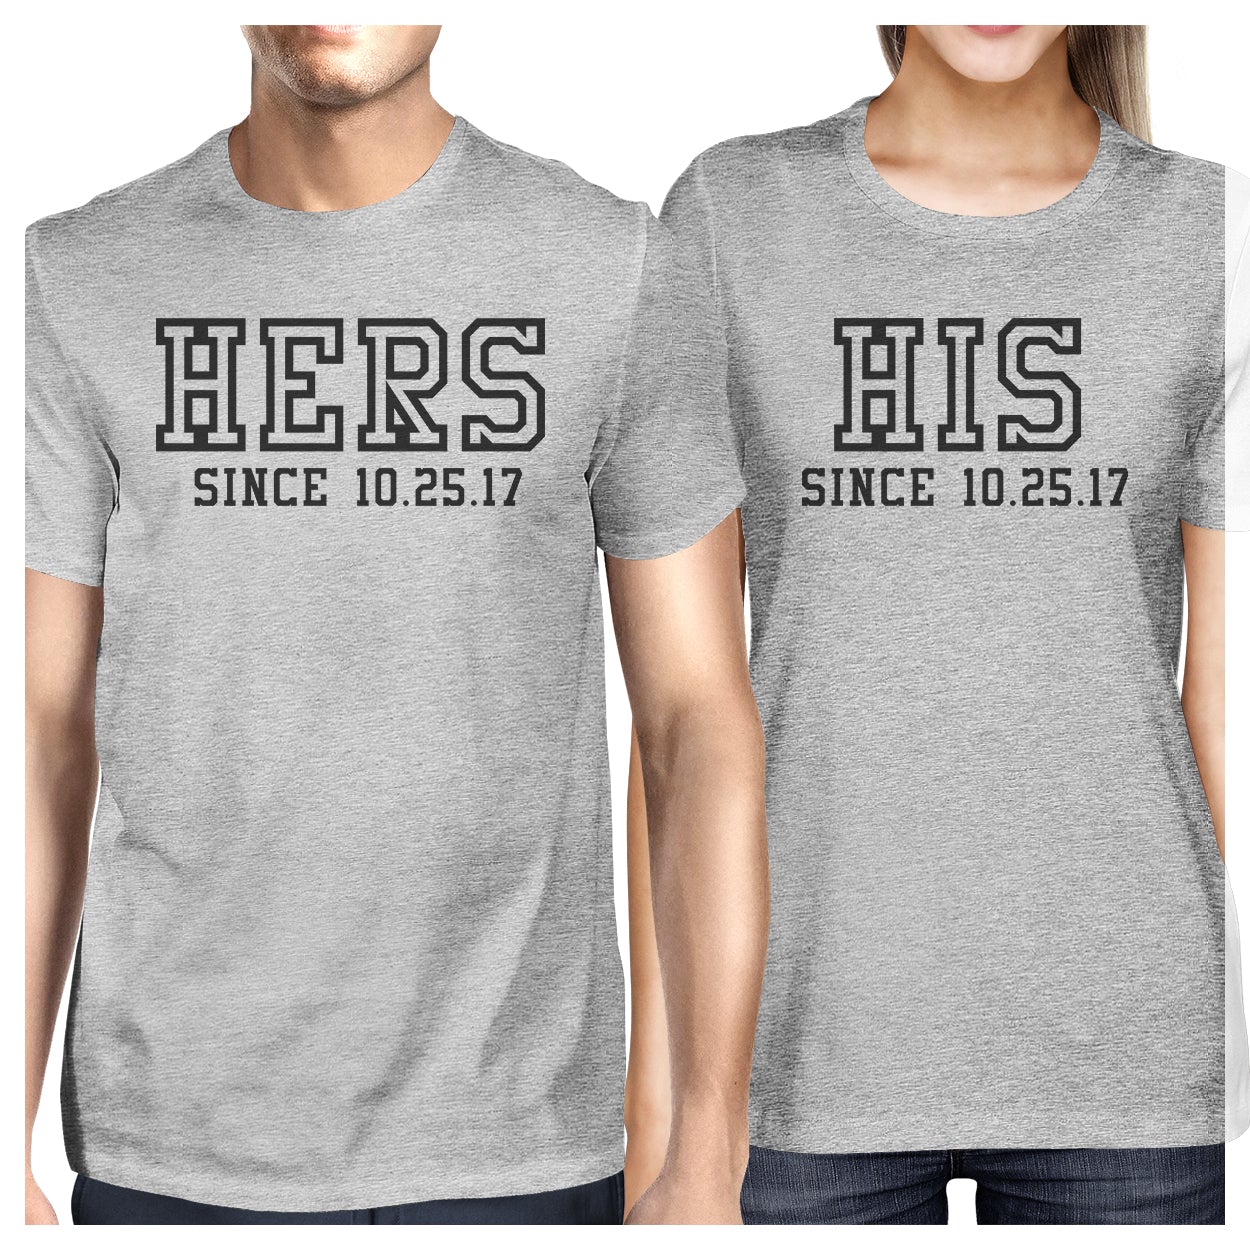 Hers And His Since Custom Matching Couple Grey Shirts